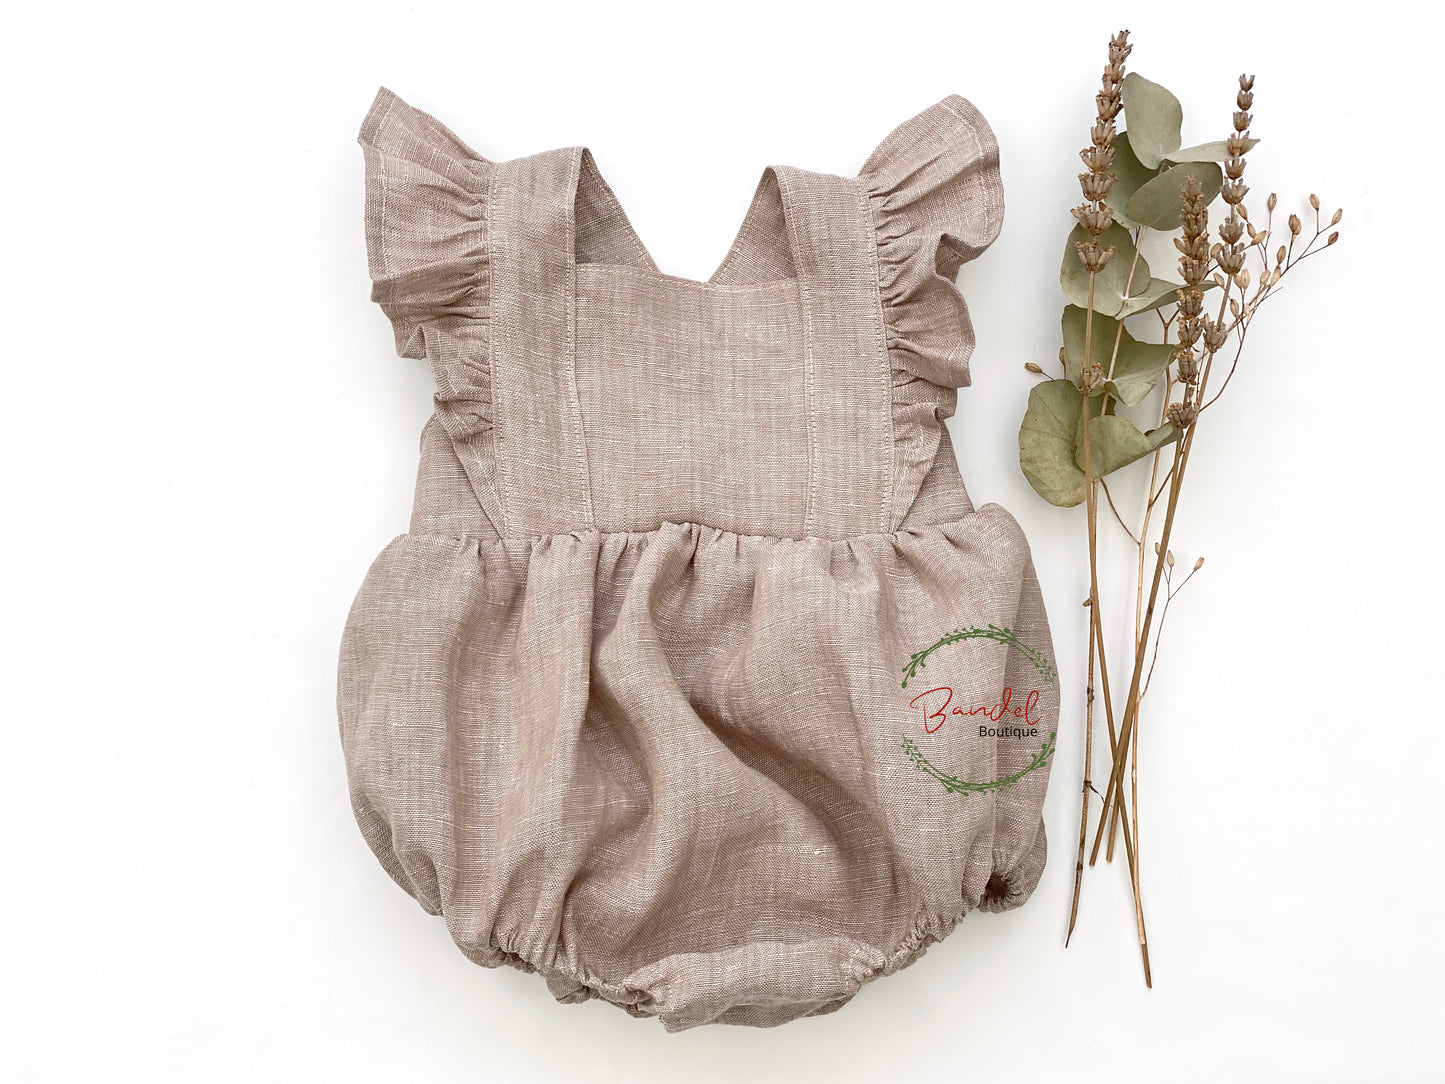 linen bubble romper is delightfully delicate and elegant. Crafted from sustainable and comfortable linen, this vintage bubble playsuit in a beautiful camel hue features ruffled sleeves, elastic at the leg and two adjustable button straps for easy growth adjustments. With snaps at the crotch for convenient diaper changes, this romper is sure to be your little one's favorite look.